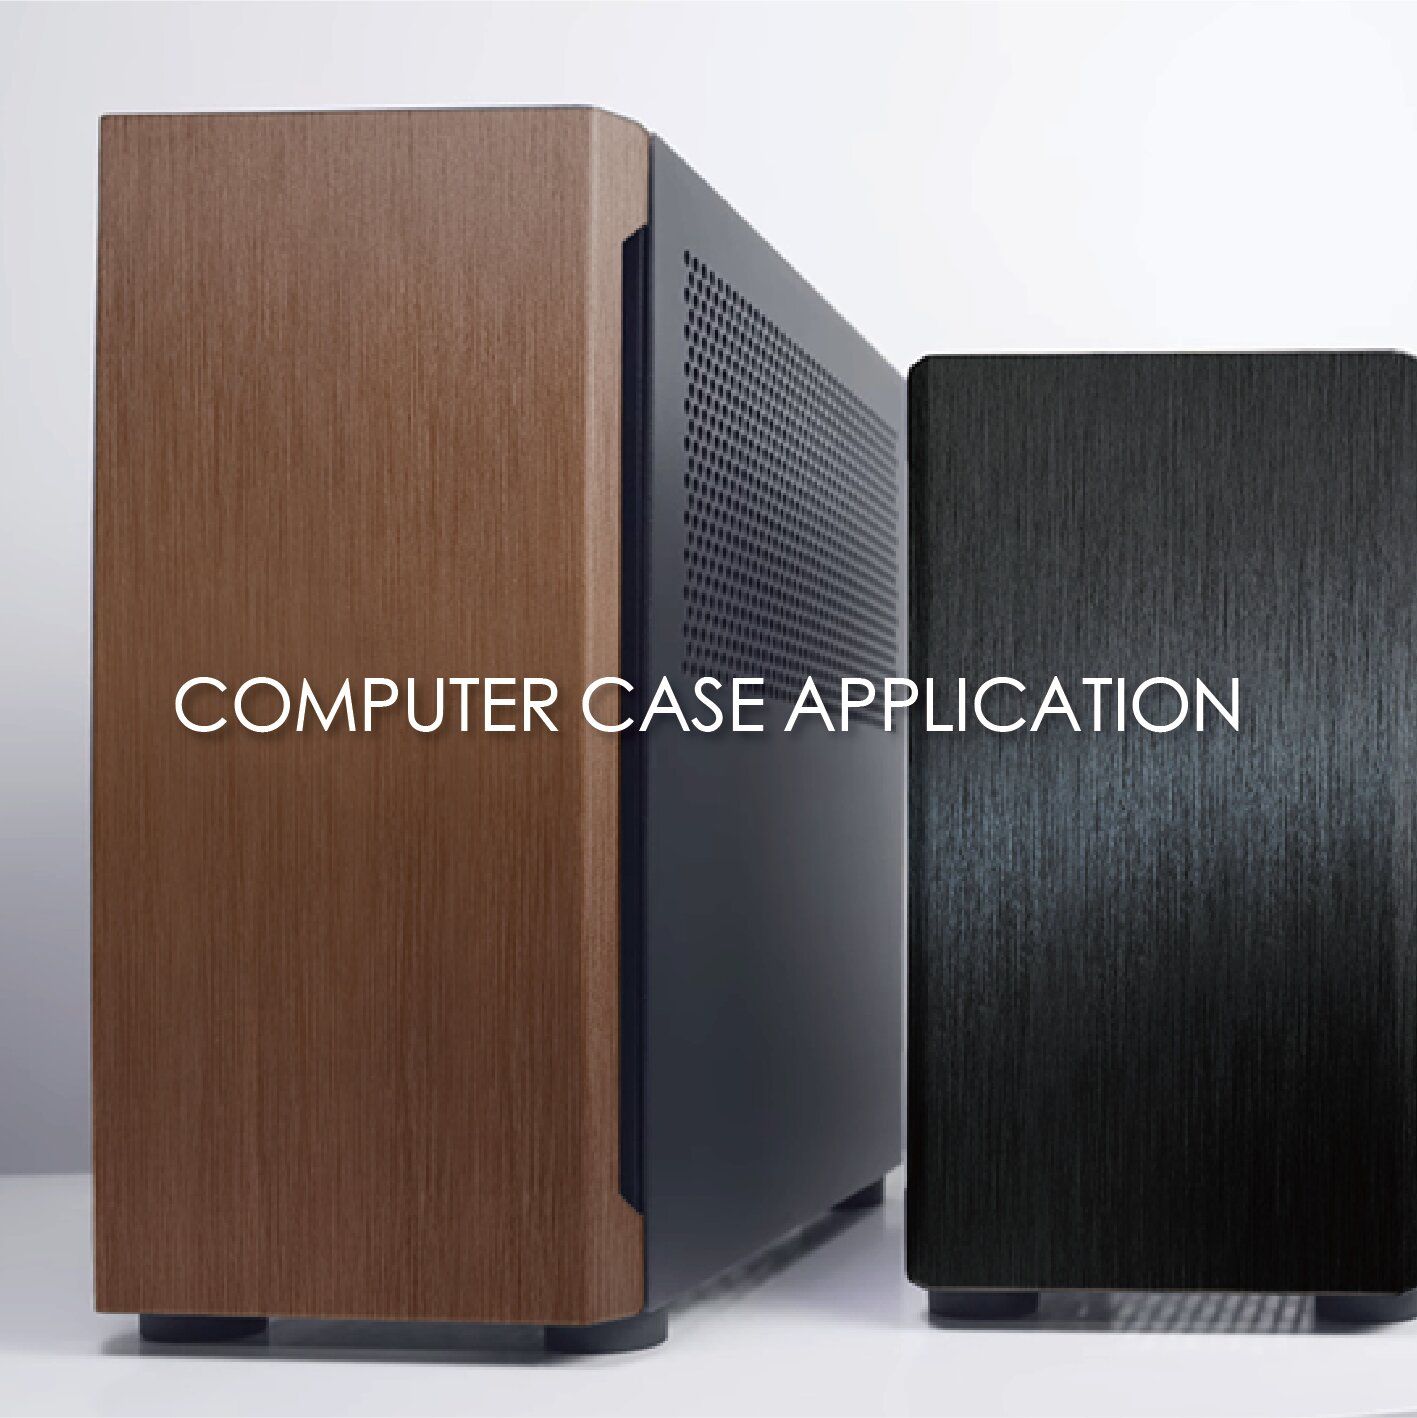 3D texture coated metal decorative computer case can increase the appearance and fashion sense